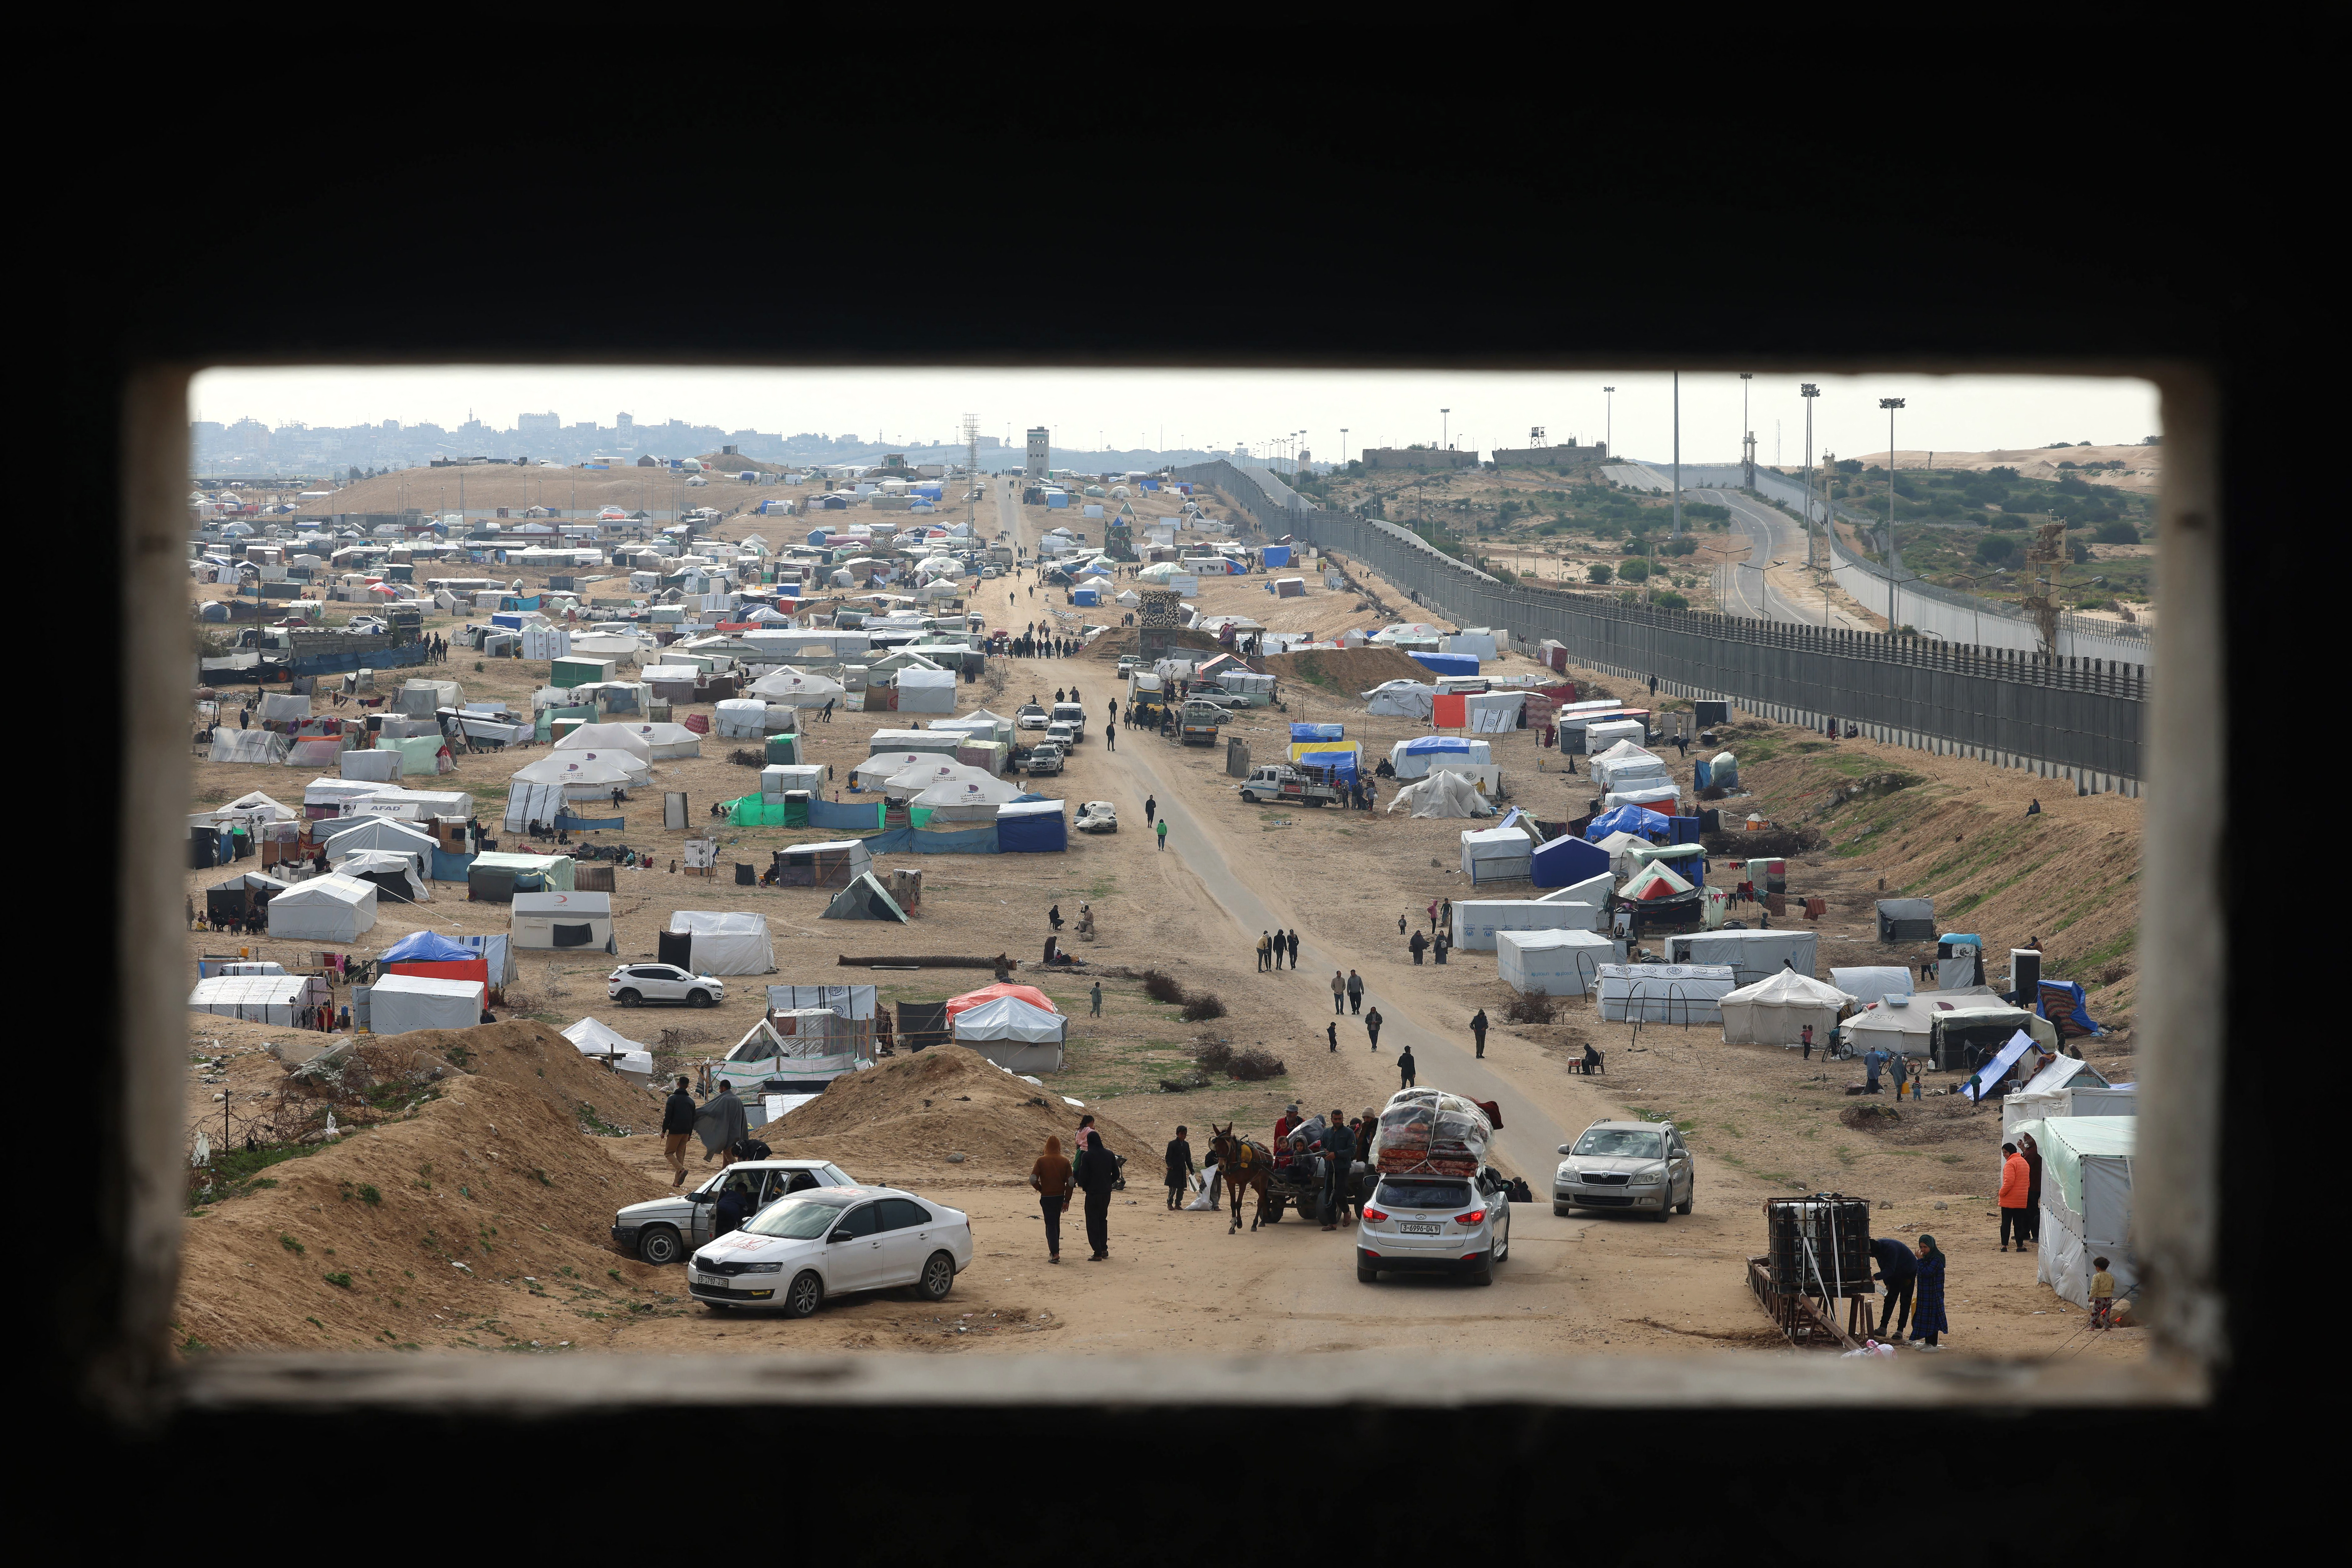 Displaced Palestinians camp in Rafah, Gaza, near the border fence with Egypt, on February 16.